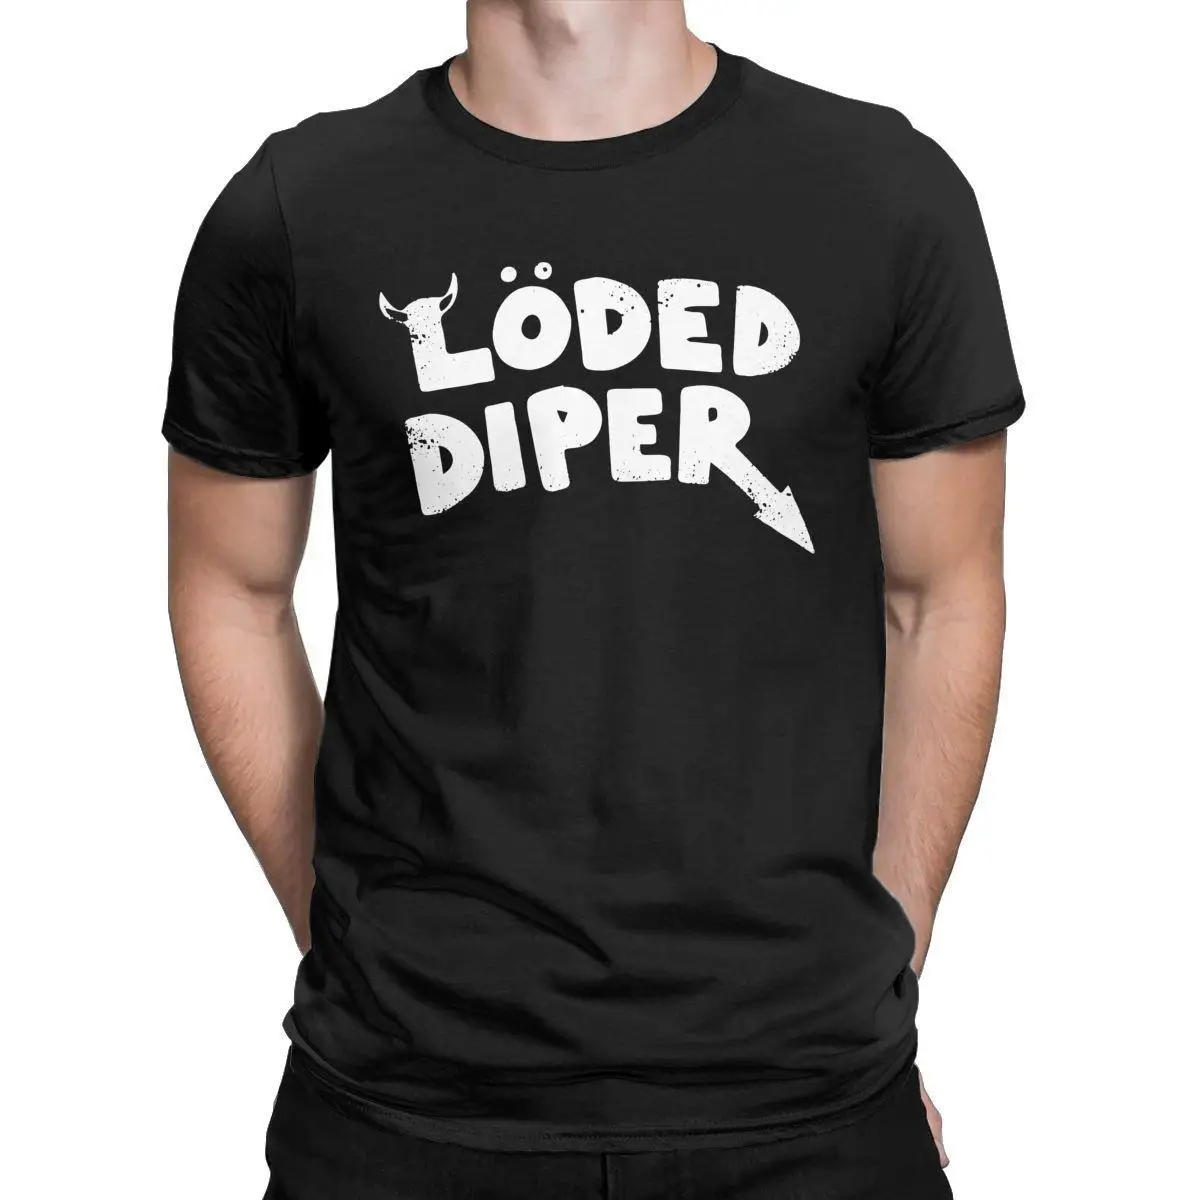 Loded Diper T Shirts Men 100% Cotton Novelty T-Shirts Round Neck Tees Short Sleeve Clothes Summer